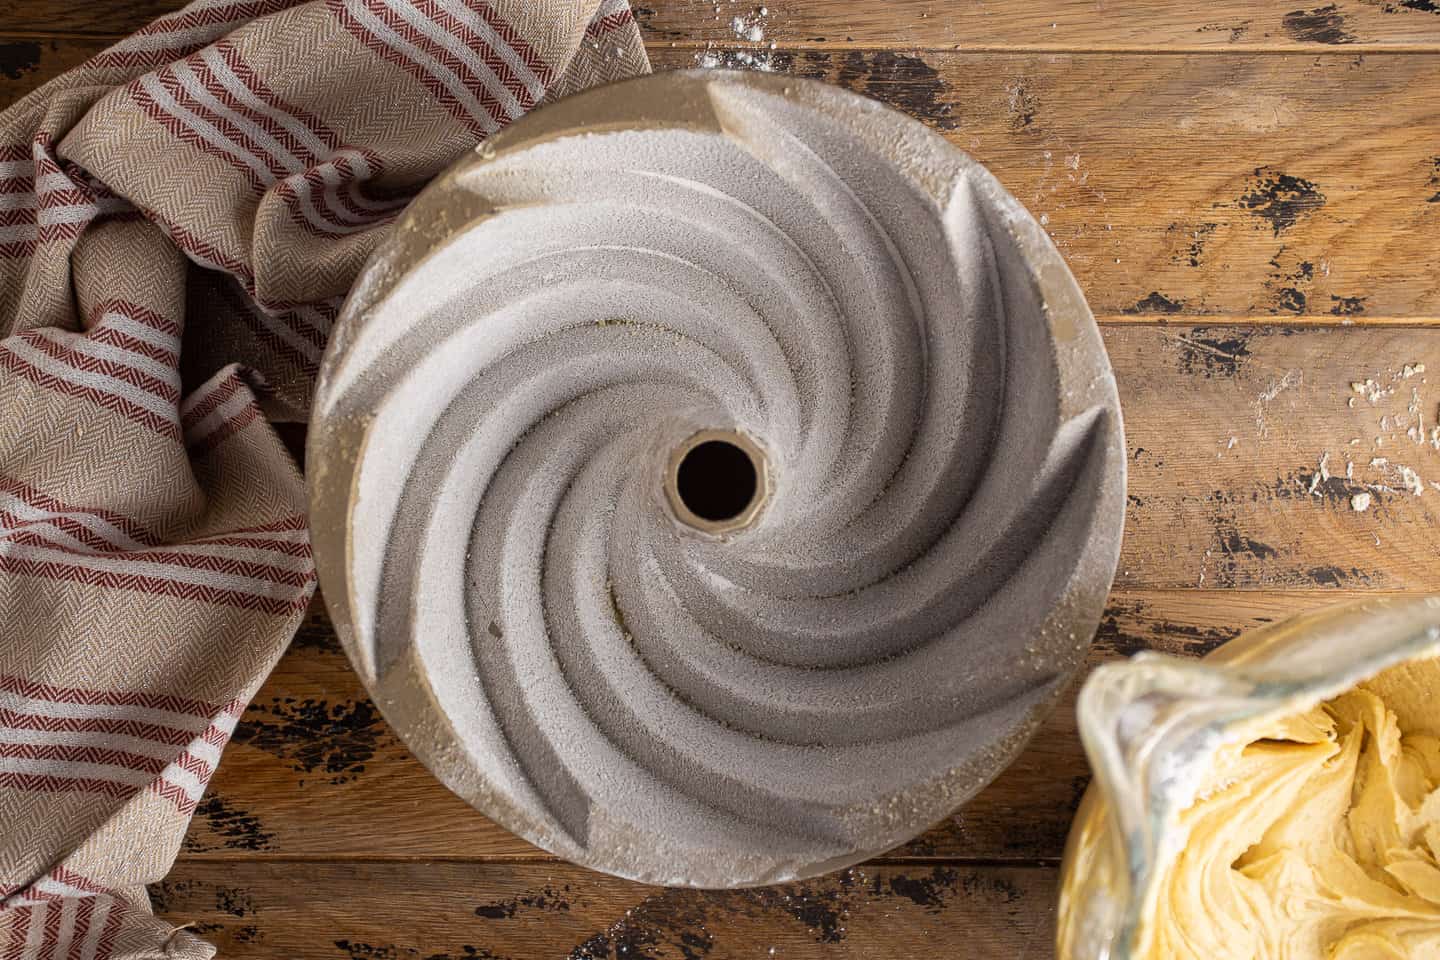 Liberally greased and floured bundt pan.